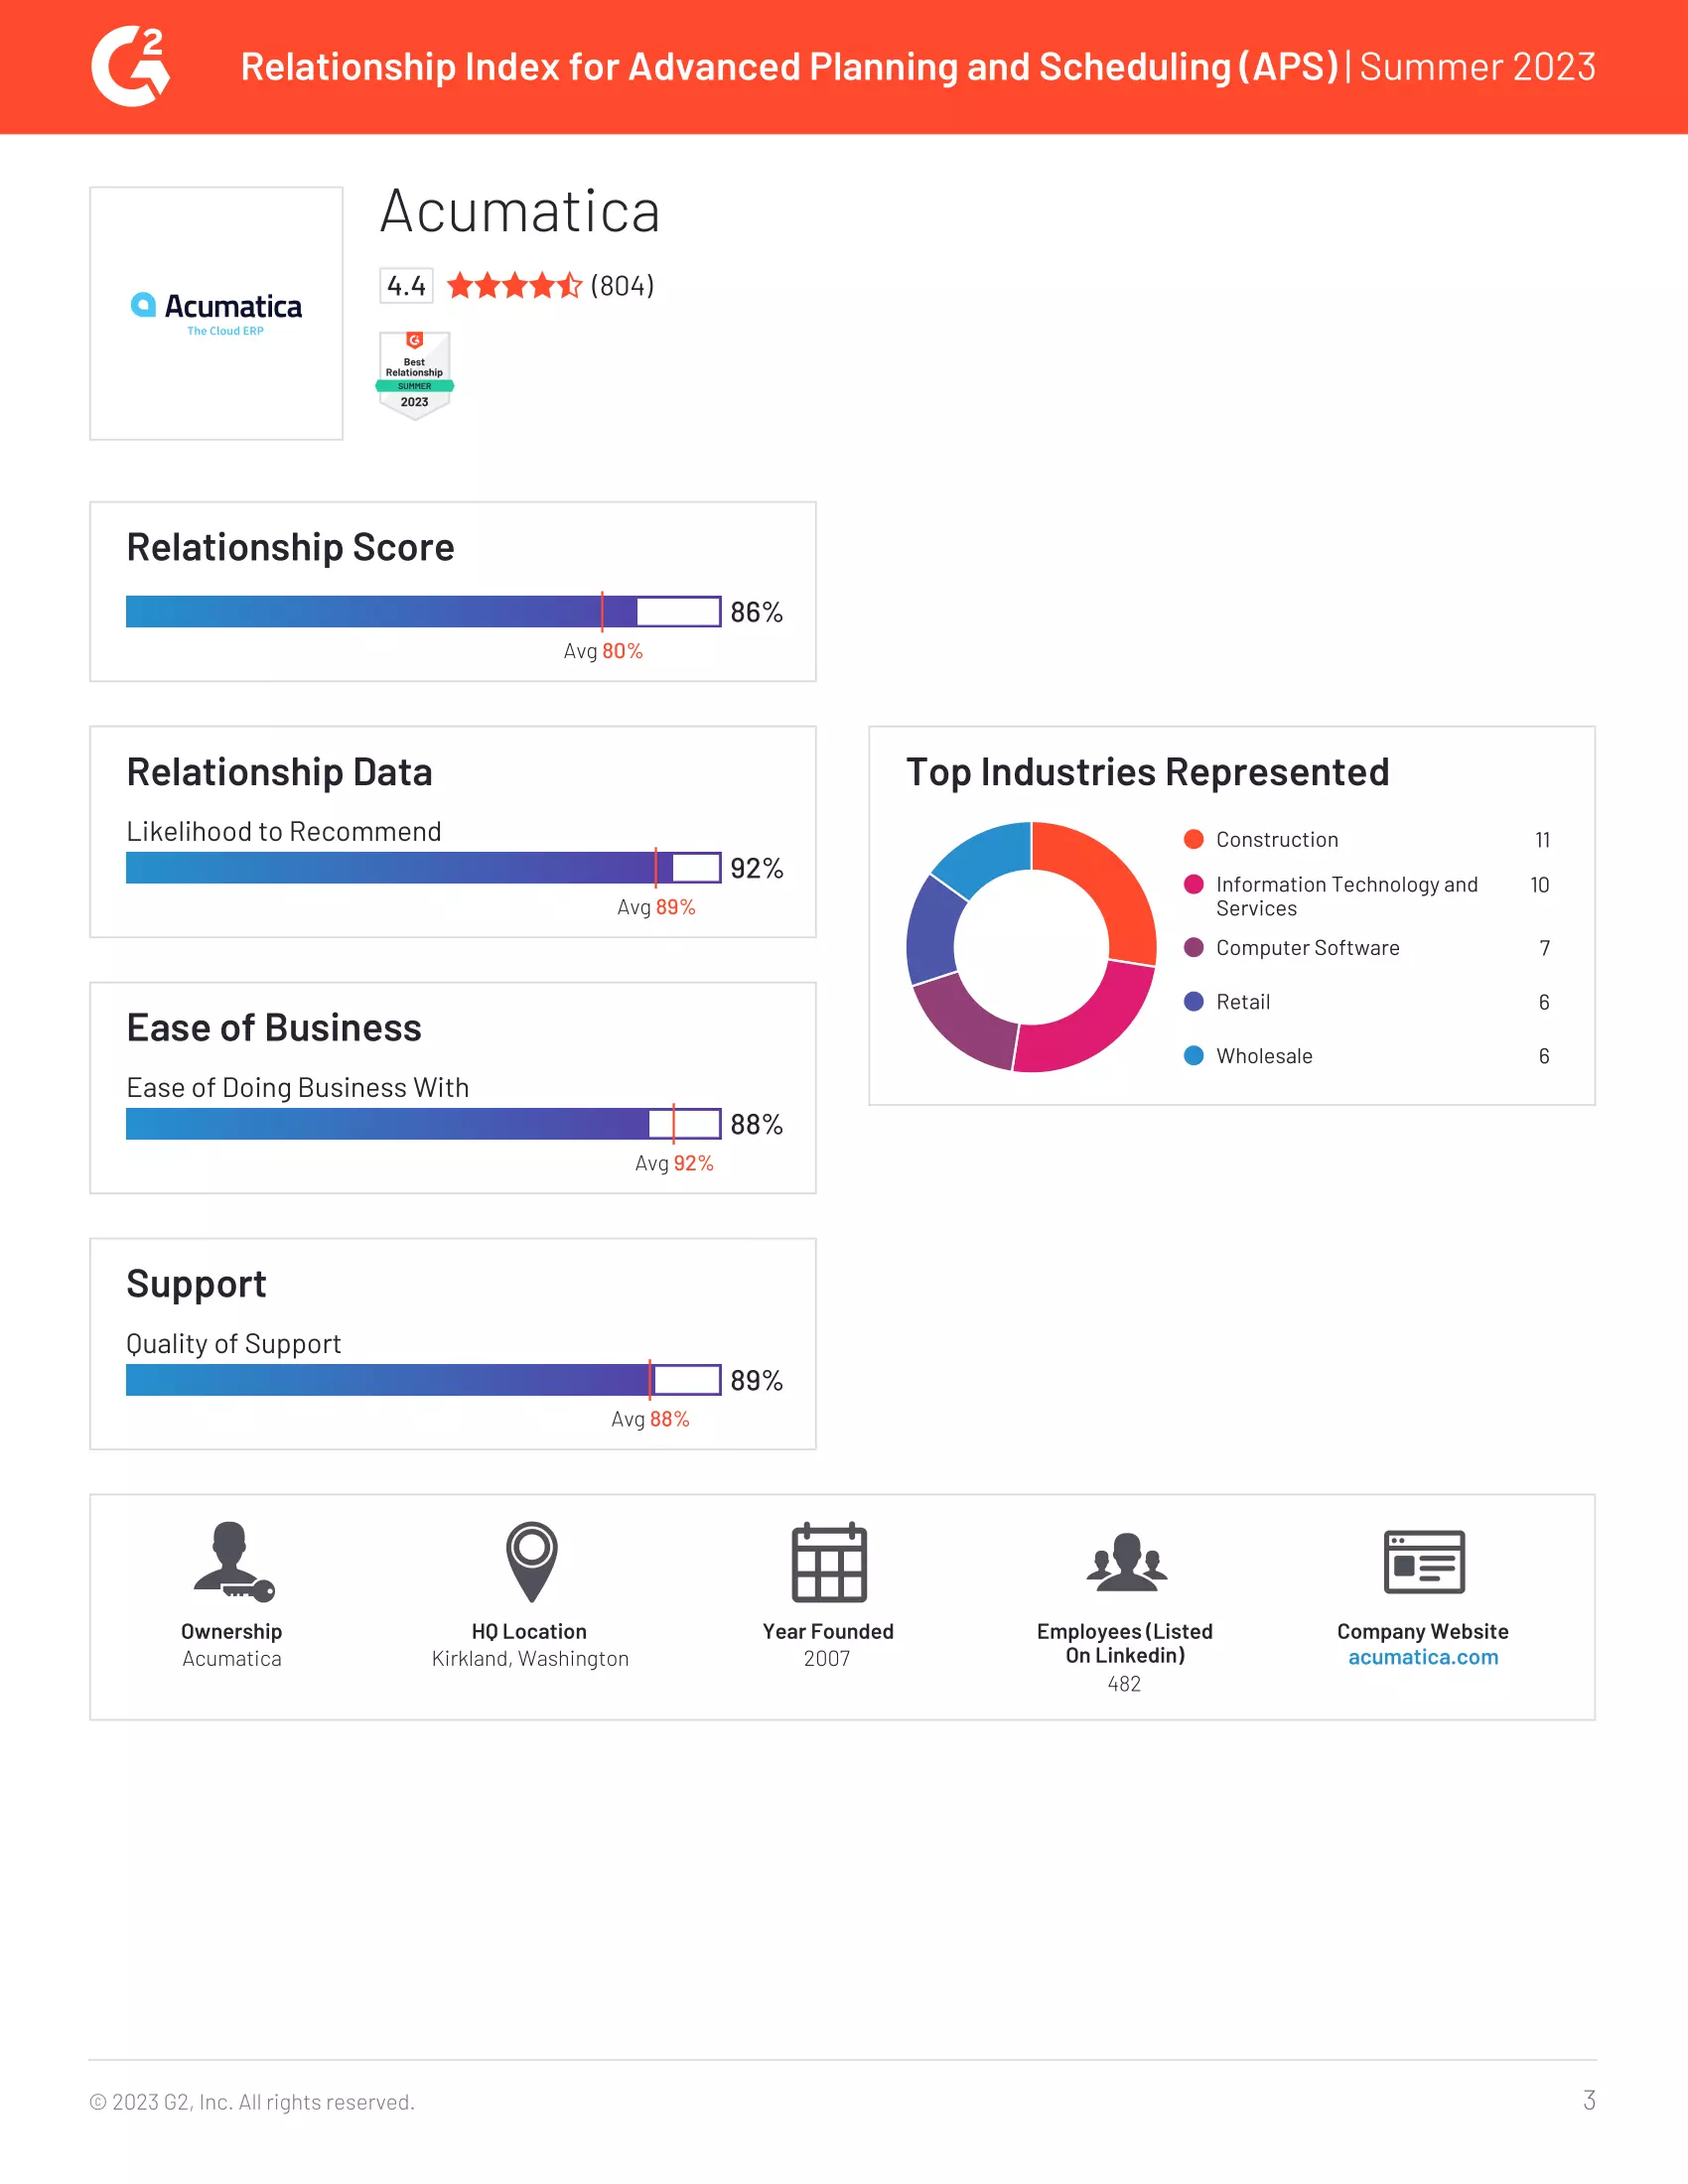 Acumatica Triumphs in New G2 Relationship Index, page 2